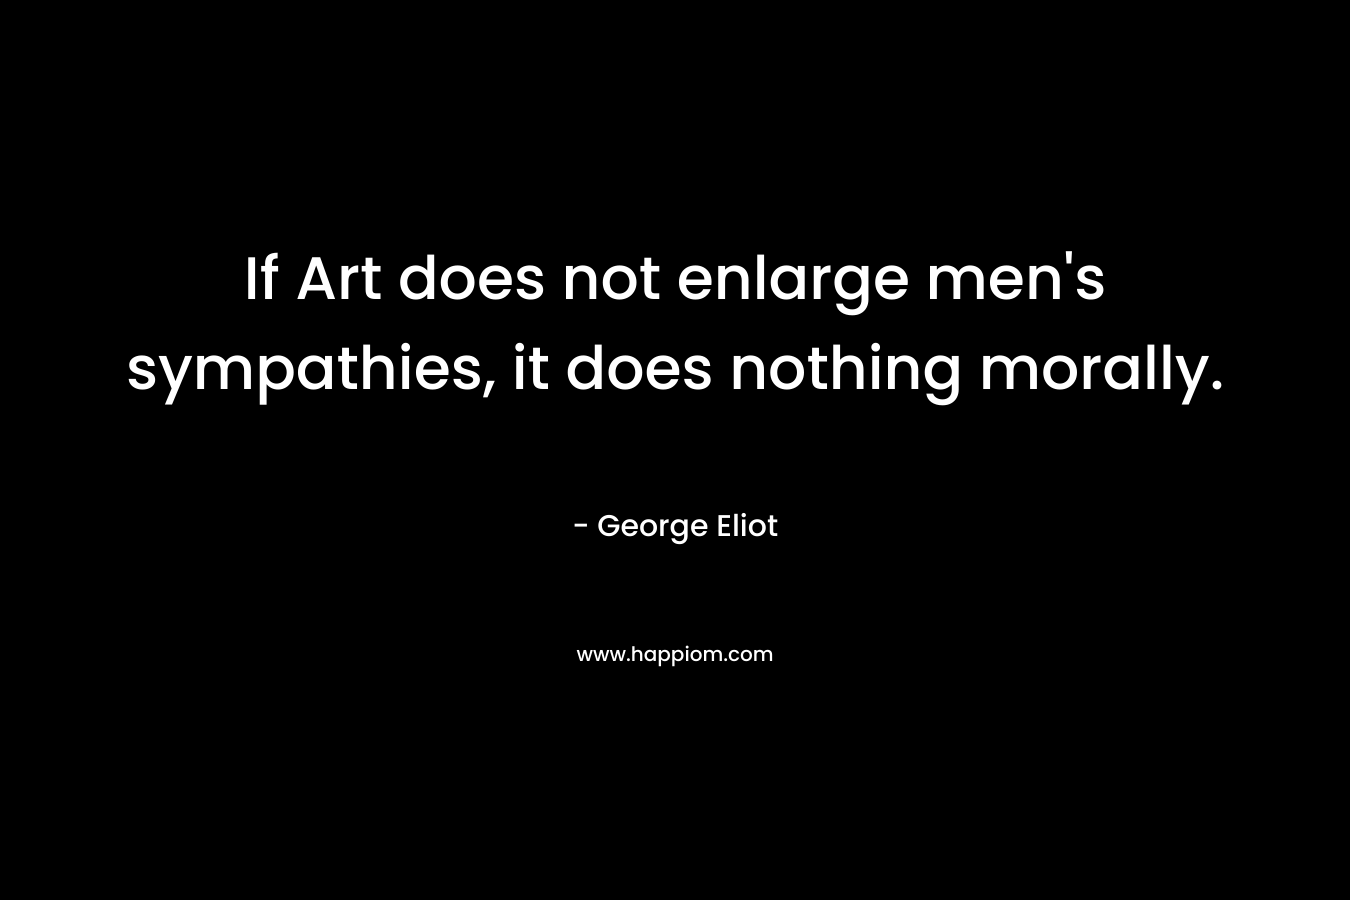 If Art does not enlarge men's sympathies, it does nothing morally.